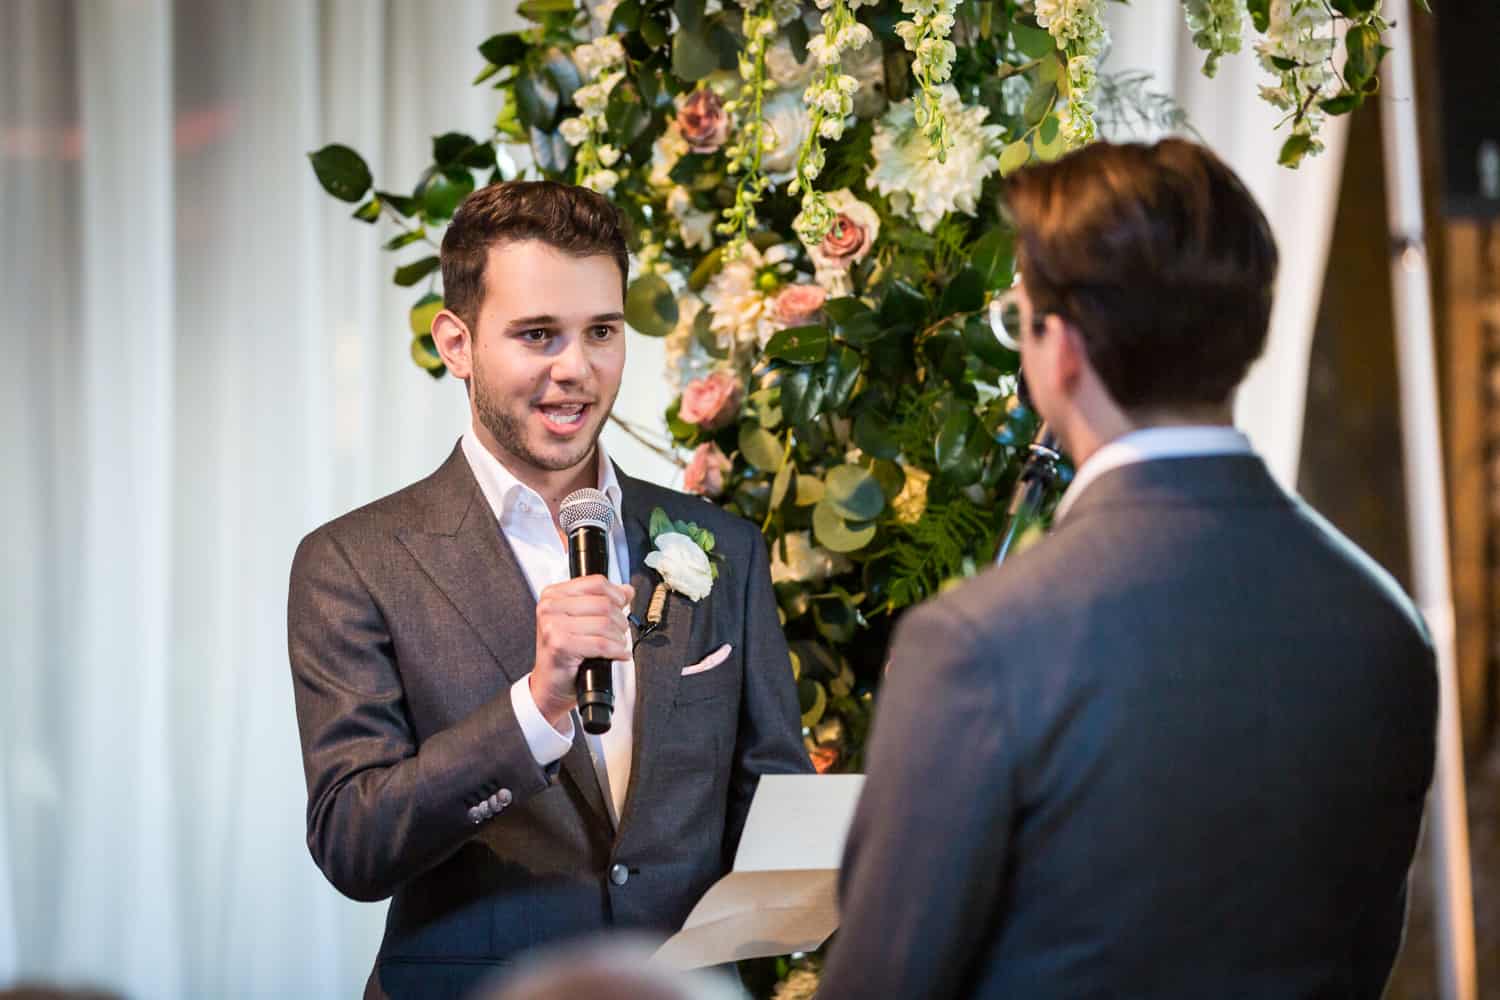 Greenpoint Loft wedding photos of groom saying vows into microphone during ceremony